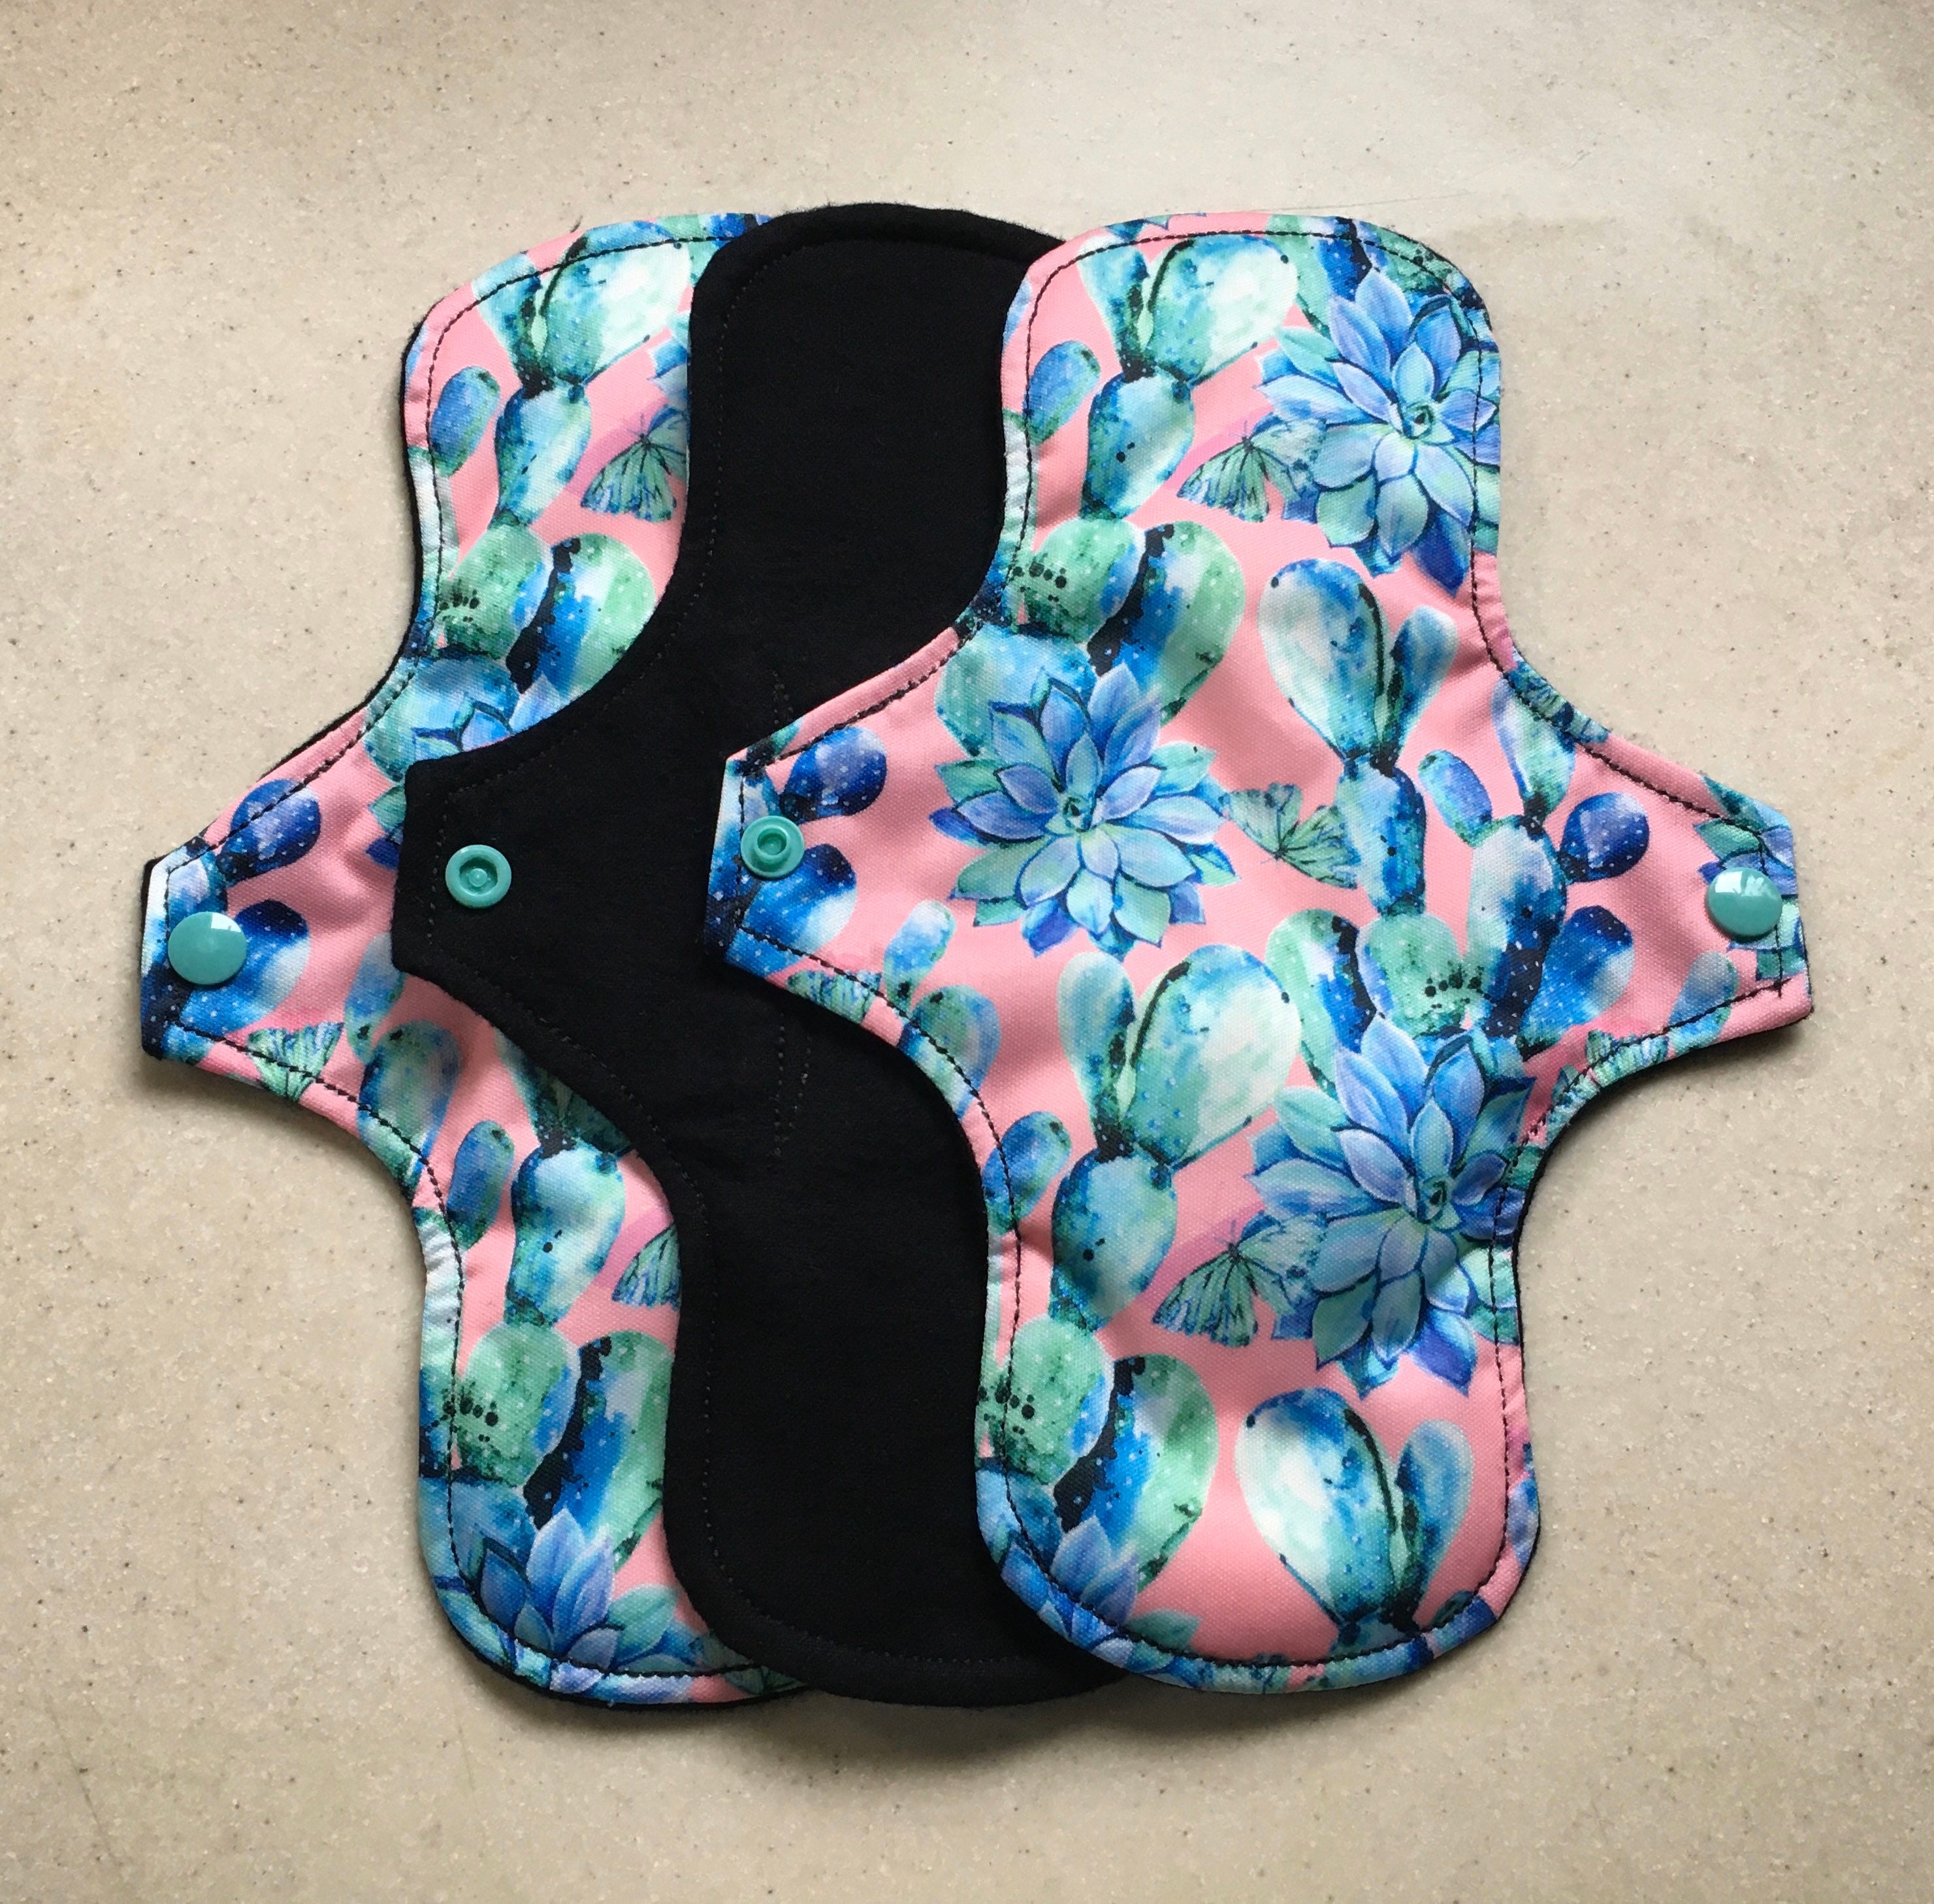 Cloth menstrual pads organic bamboo and cotton absorbent core reusable cloth pads sanitary napkins liners moderate overnight priced per pad